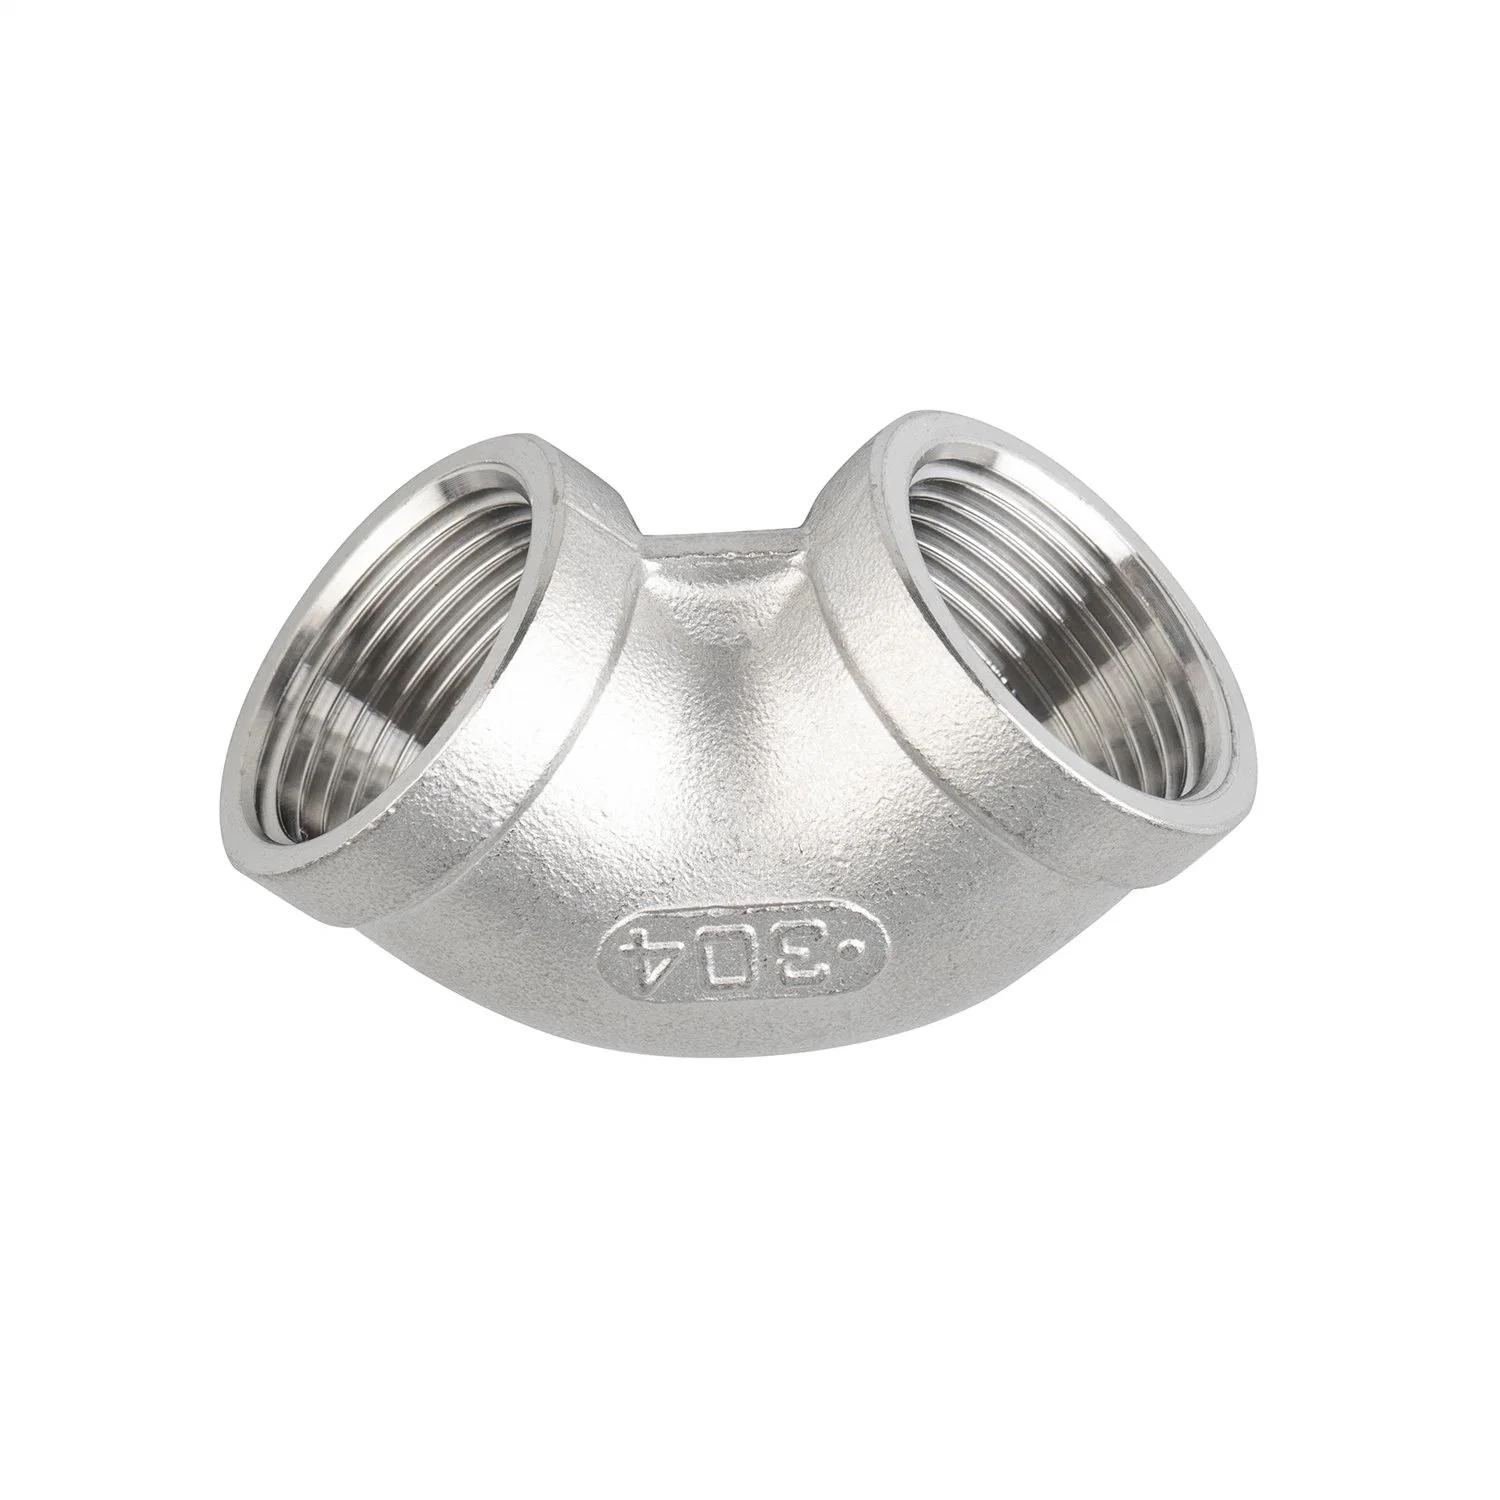 Stainless Steel Pipe Fittings 304 1/4"-4" NPT/BSPT 90 Degree Elbow